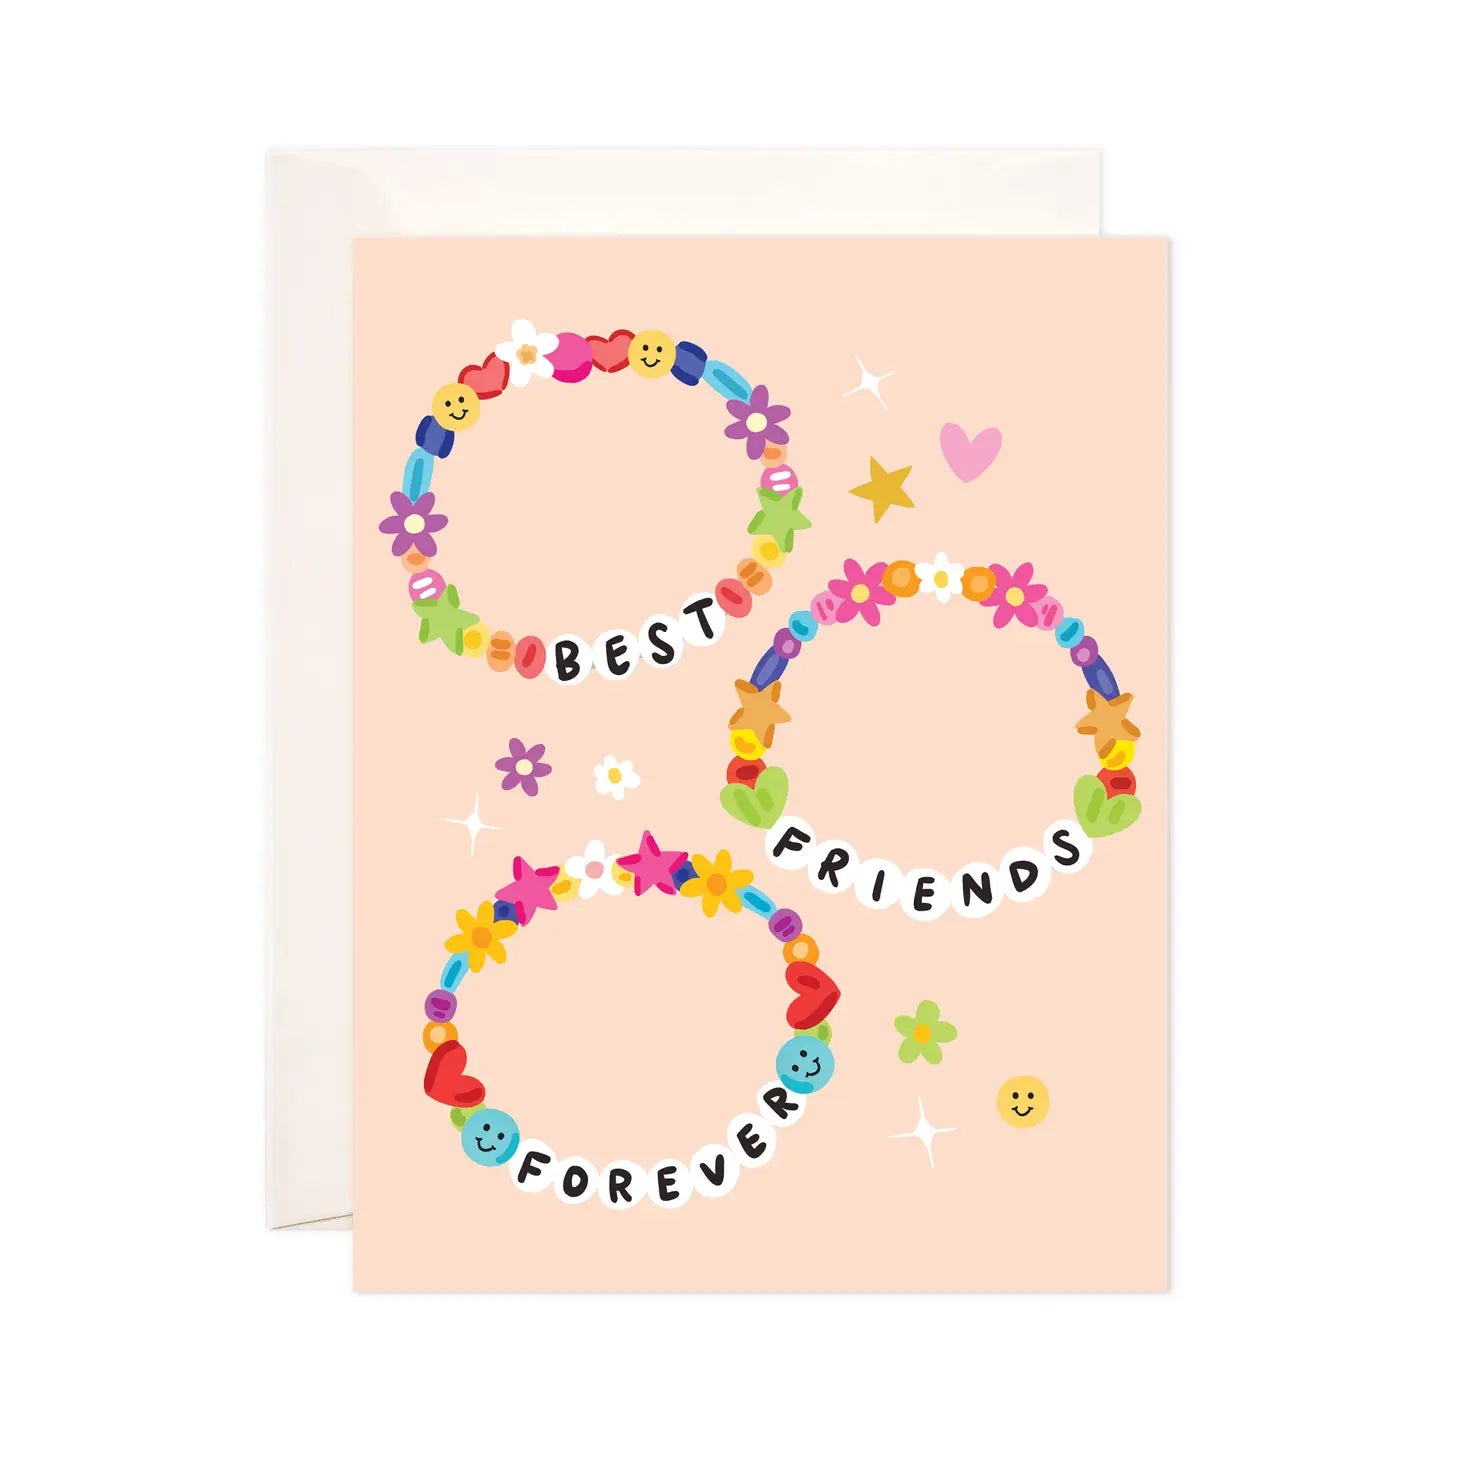 White card with light orange background. Three friendship bracelets with smiley face and flower beads. Each bracelet spells out a different word: best, friends, forever